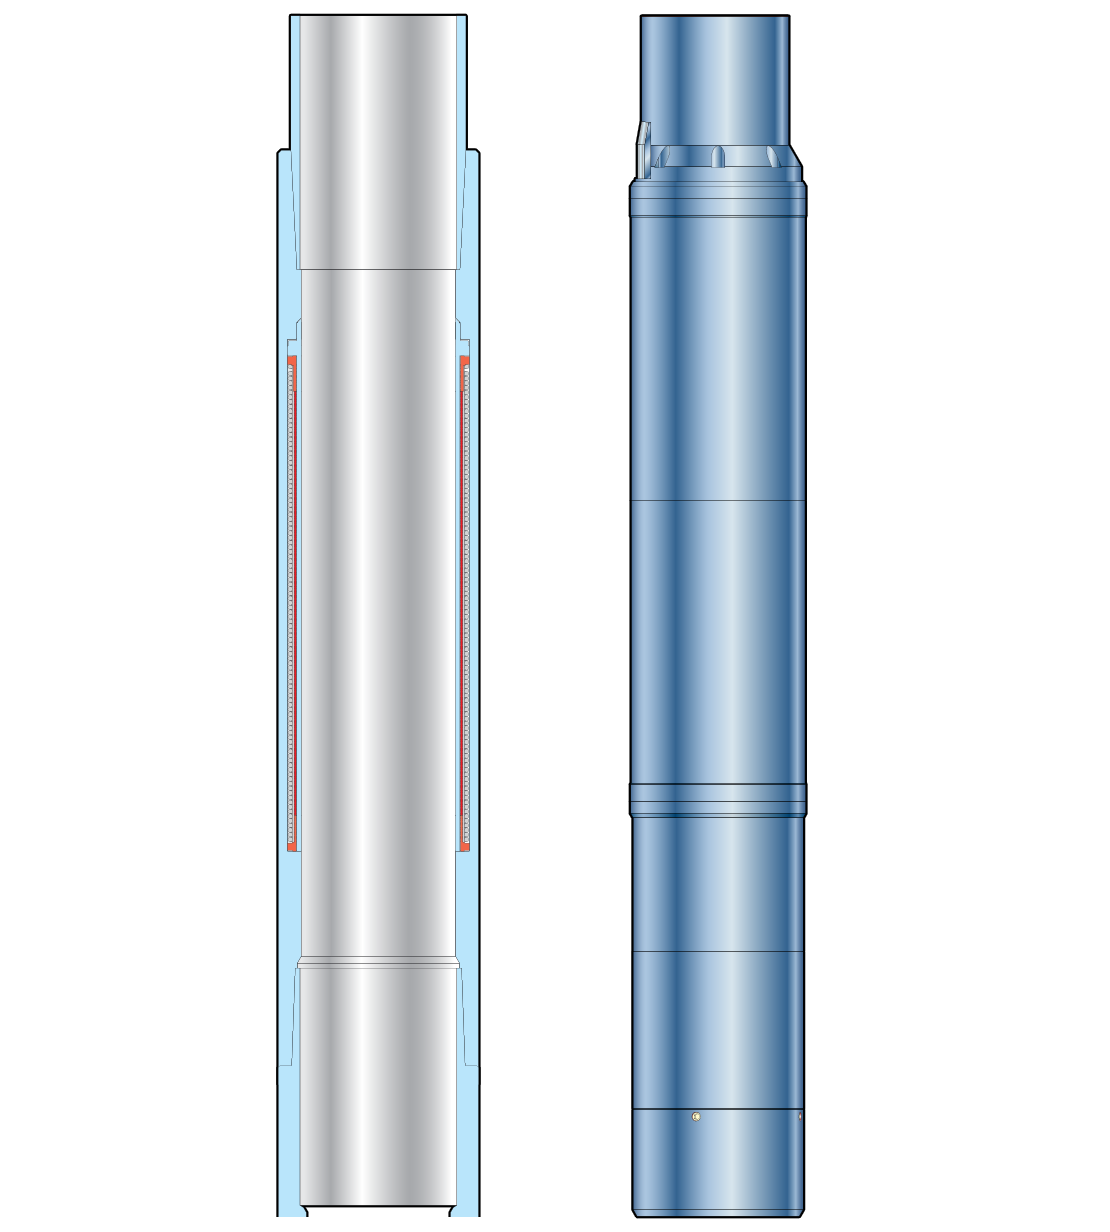 3D cutaway illustration of the inductive coupler technology for intelligent completions.